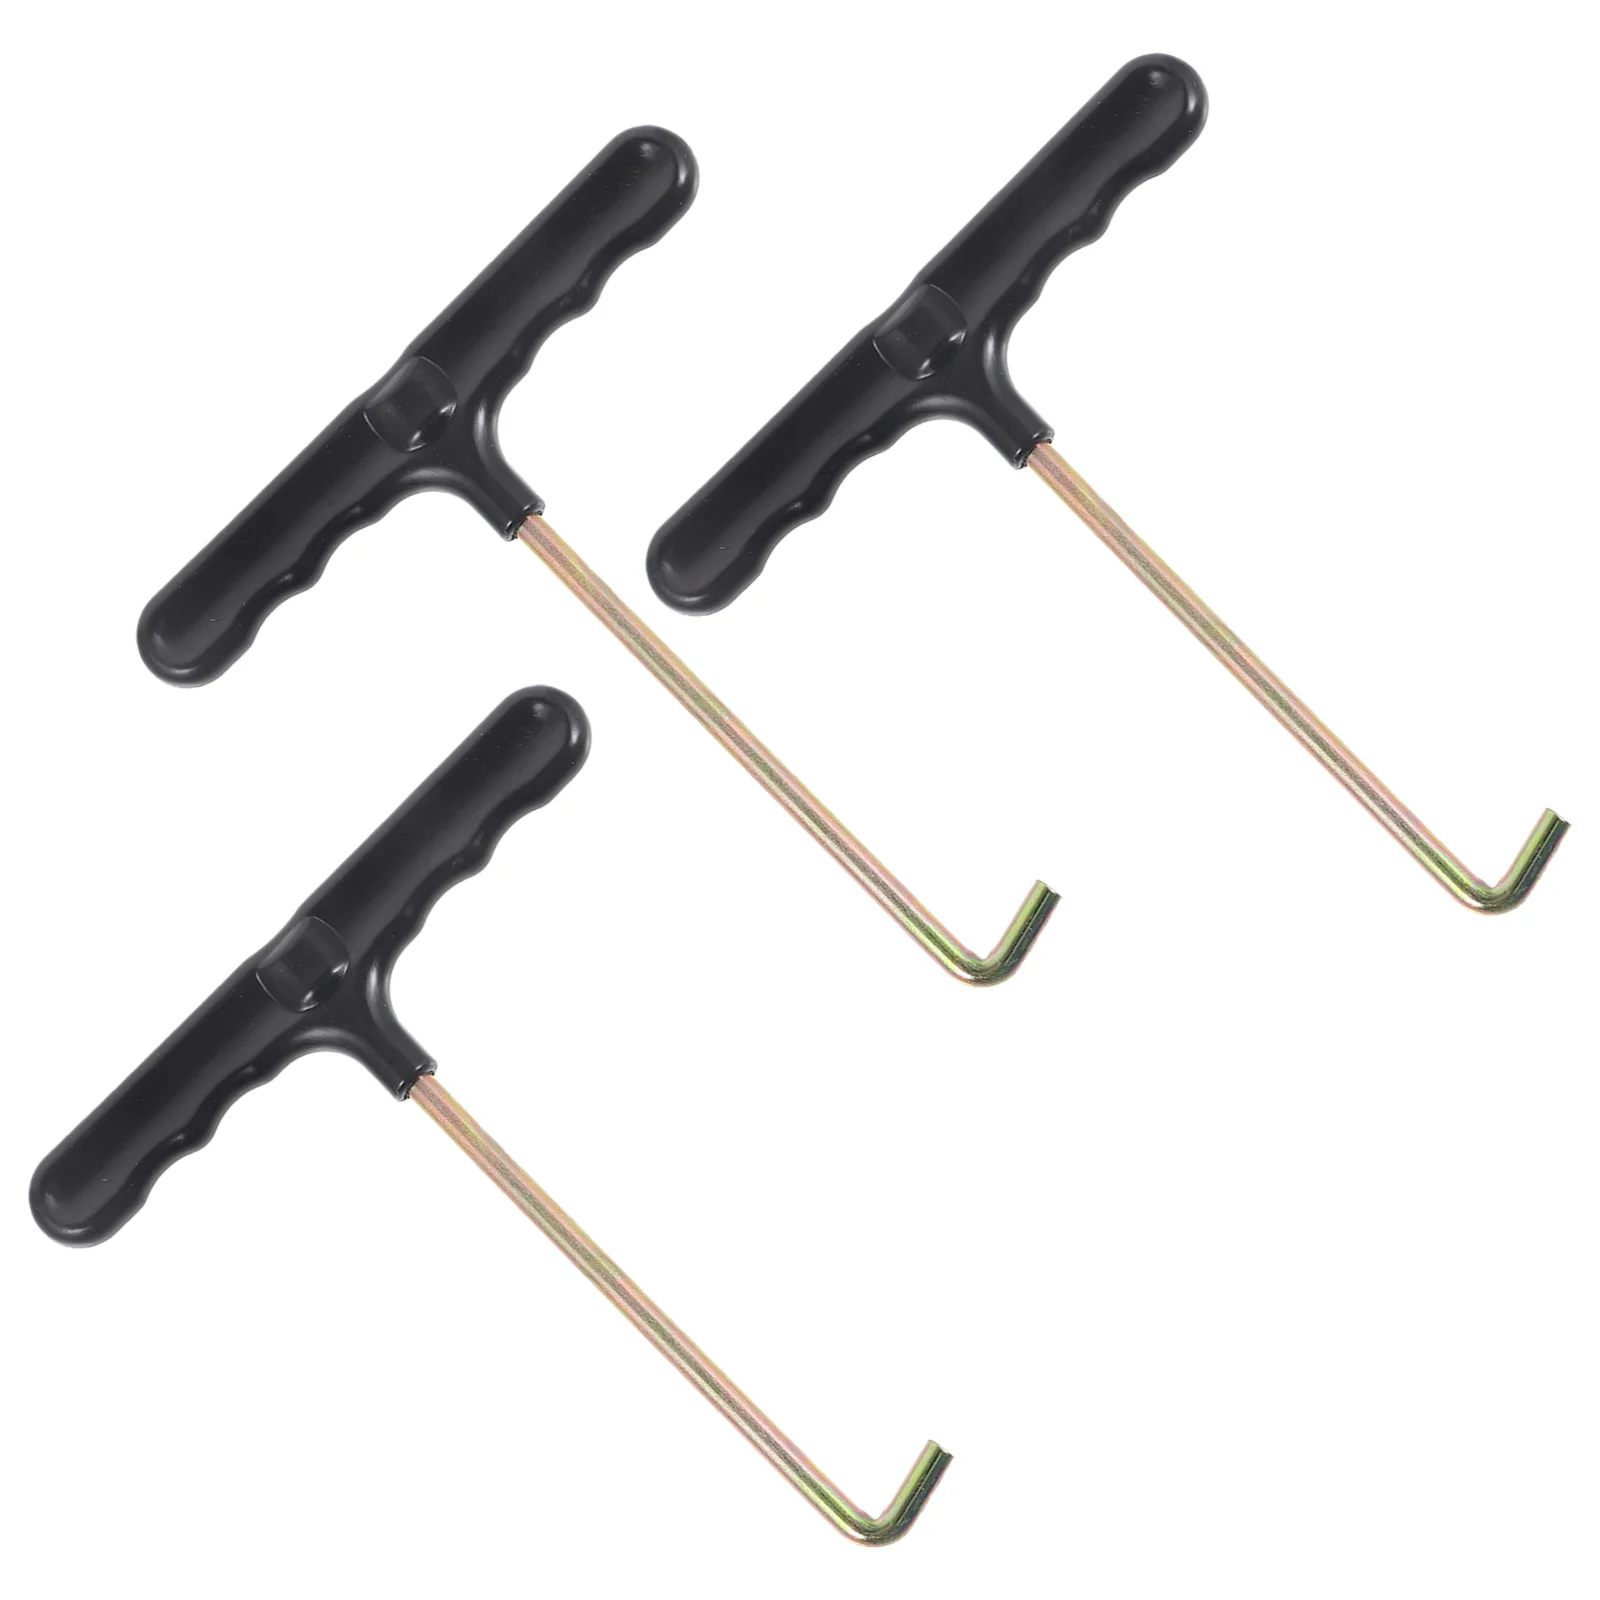 

3 Pcs Skate Shoe Hook Portable Shoelace Tighteners Shoelaces Shoes Durable Pullers T-shaped Tools Tightening Hooks Major